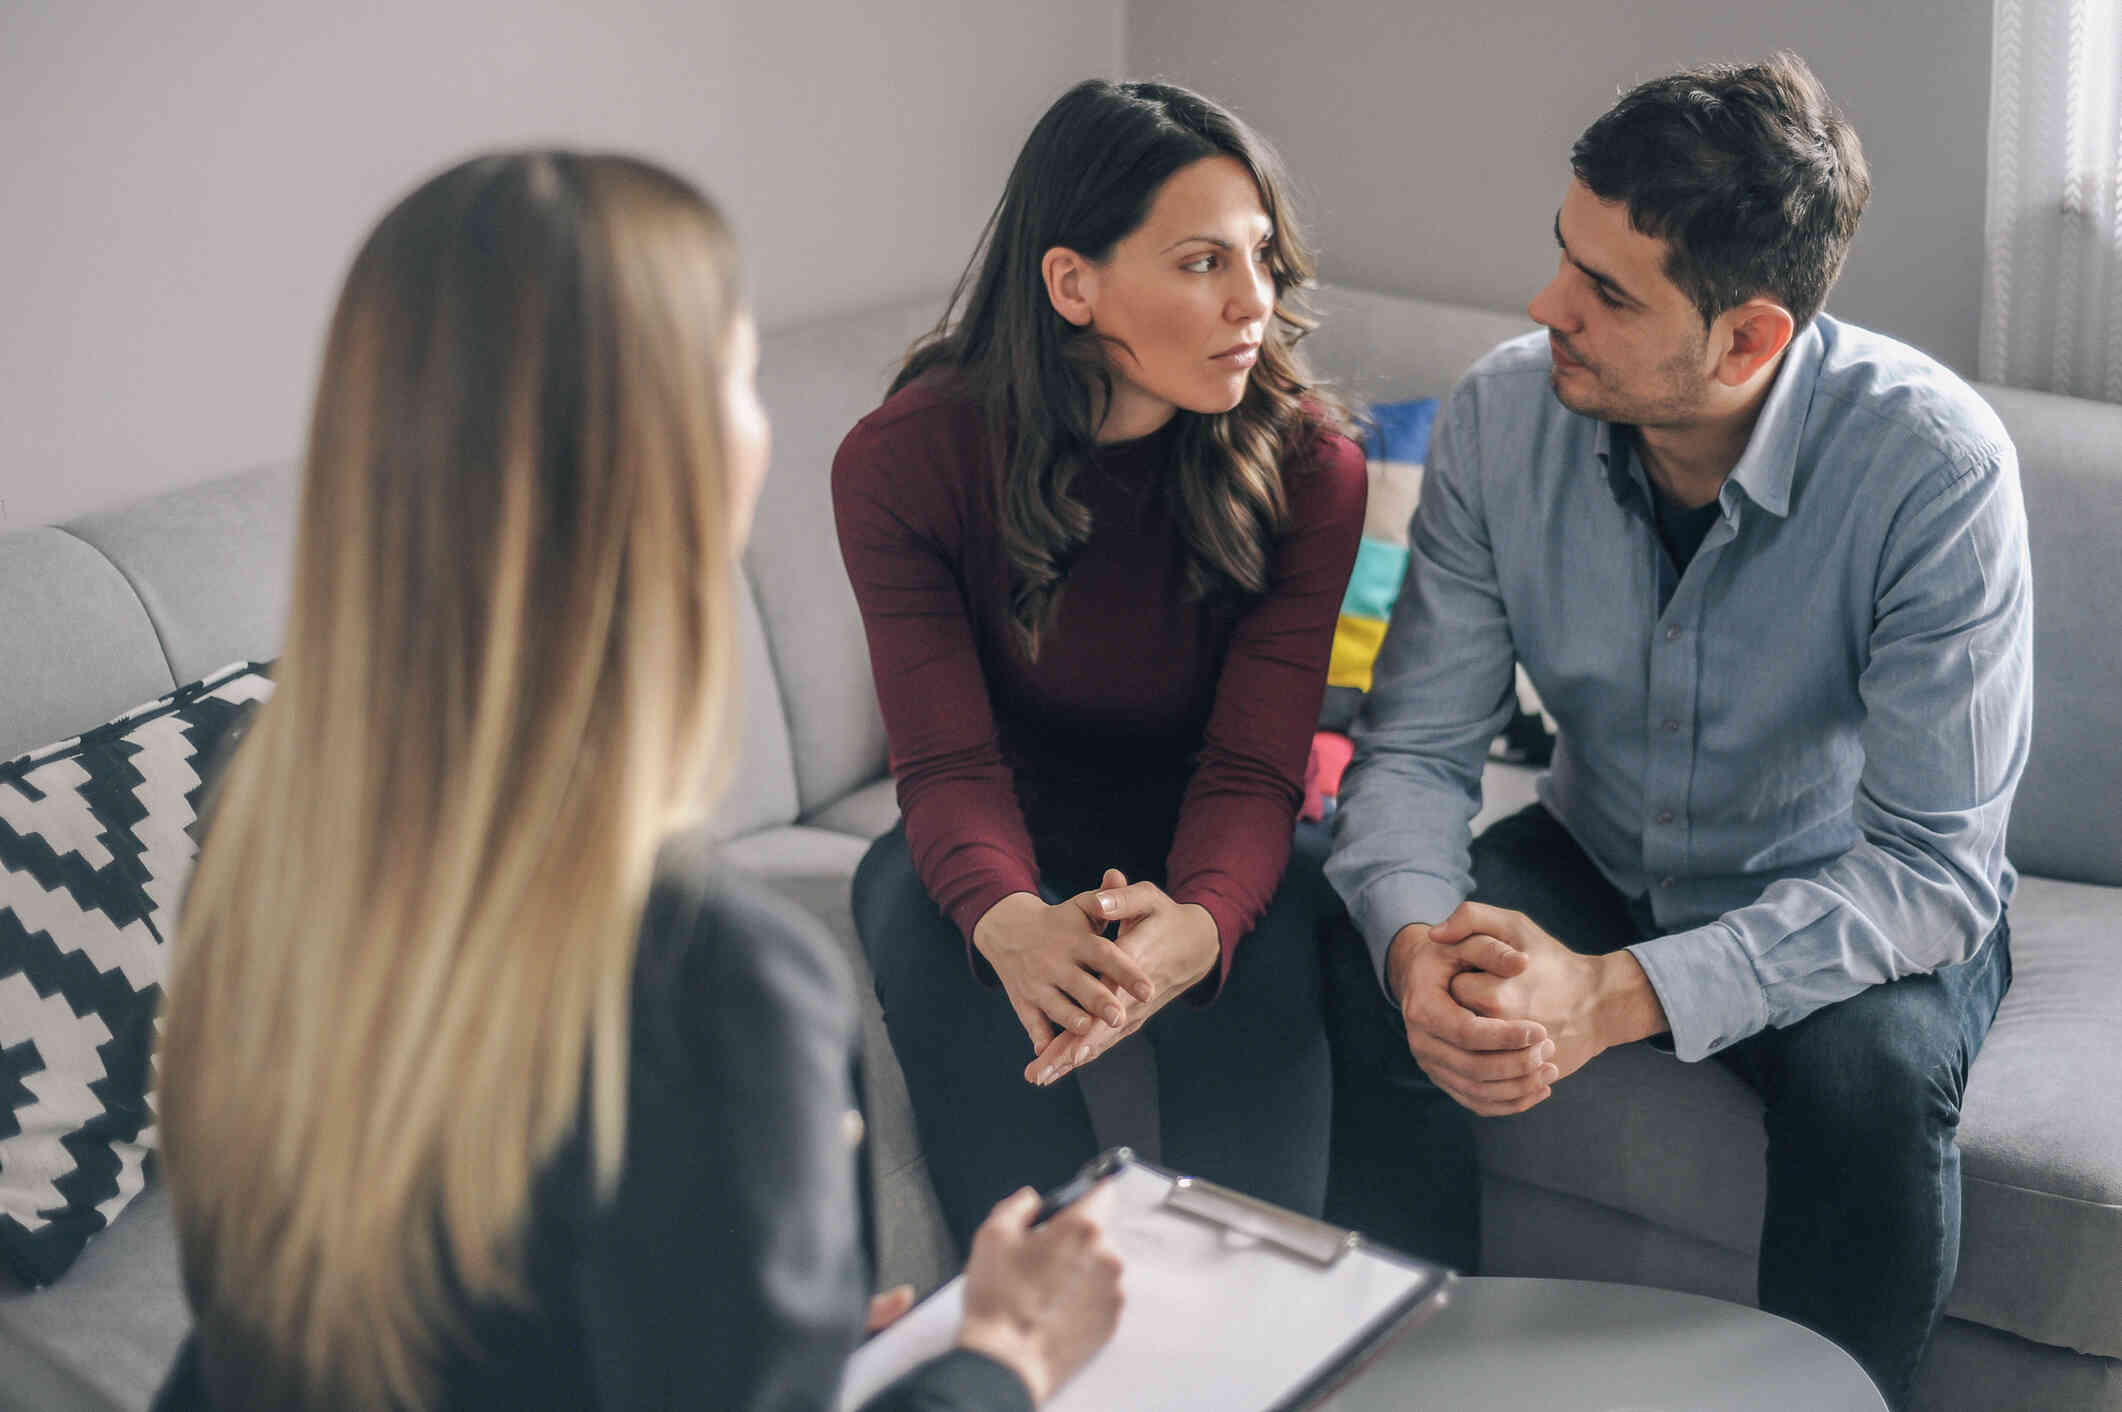 A male and female family memeber sit  next to each other and look at one another with worried expressions as they sit across from their therapist.